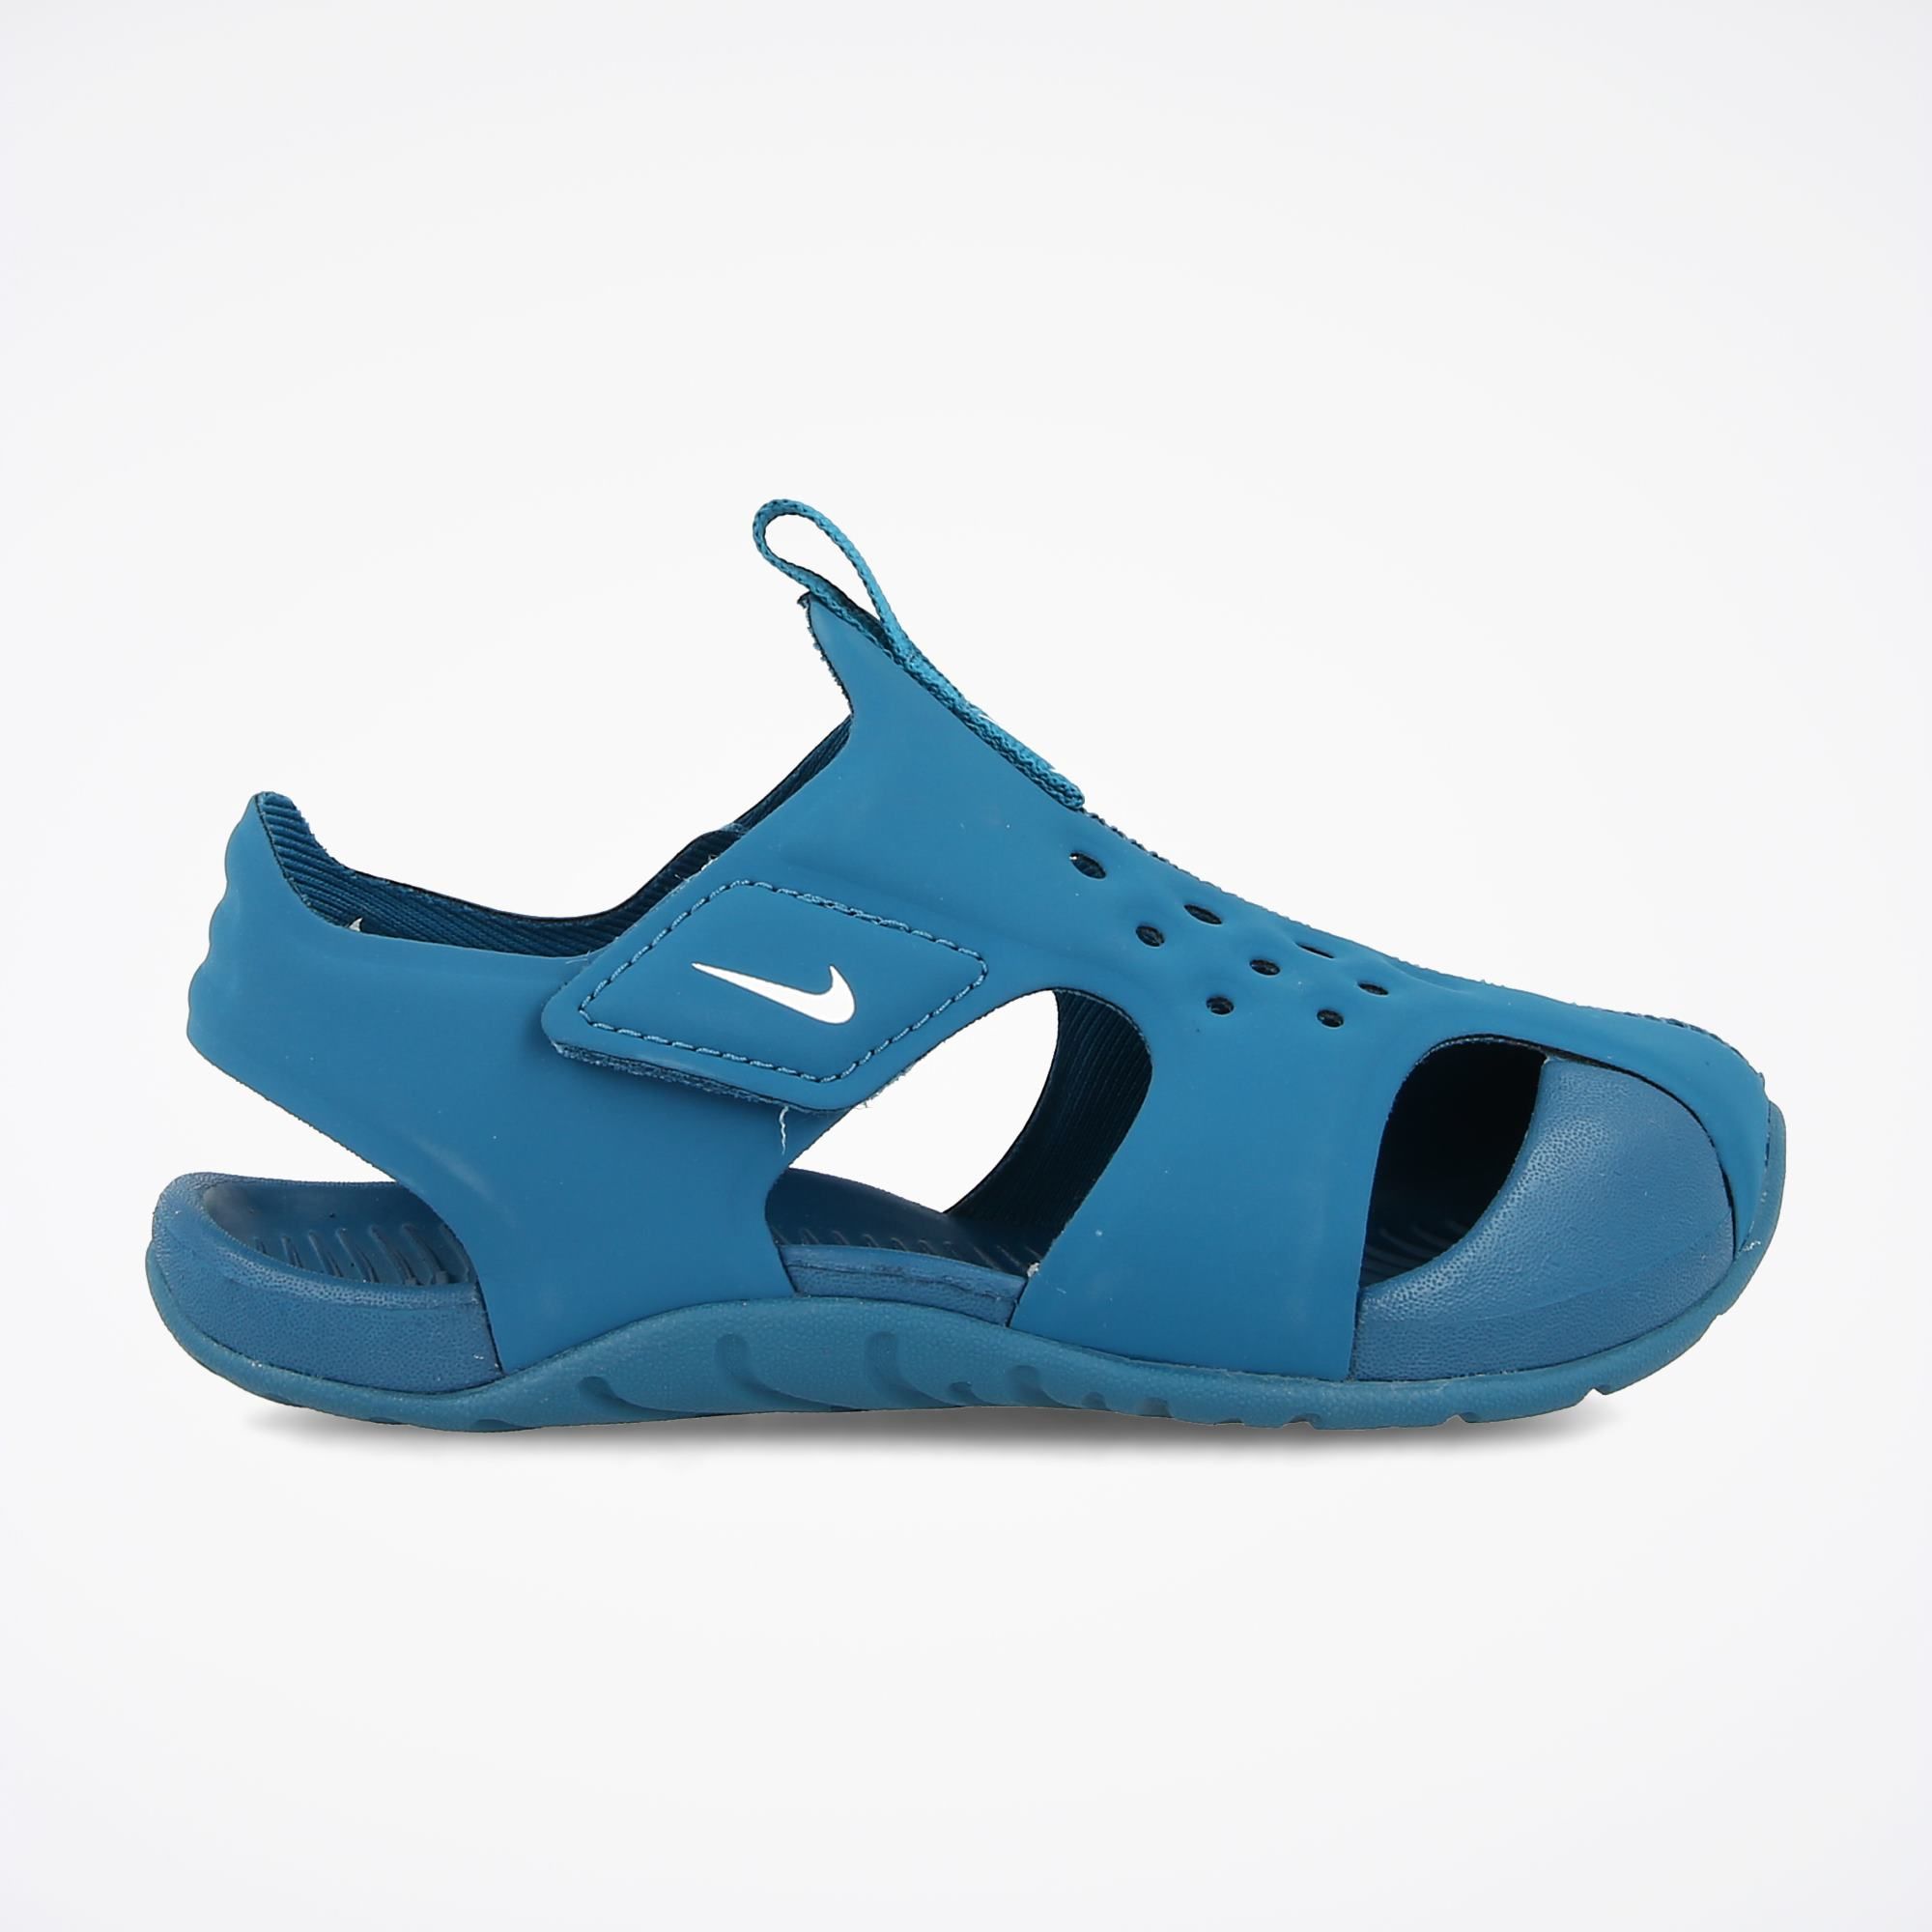 buy > sandale nike sunray protect 2, Up to 61% OFF